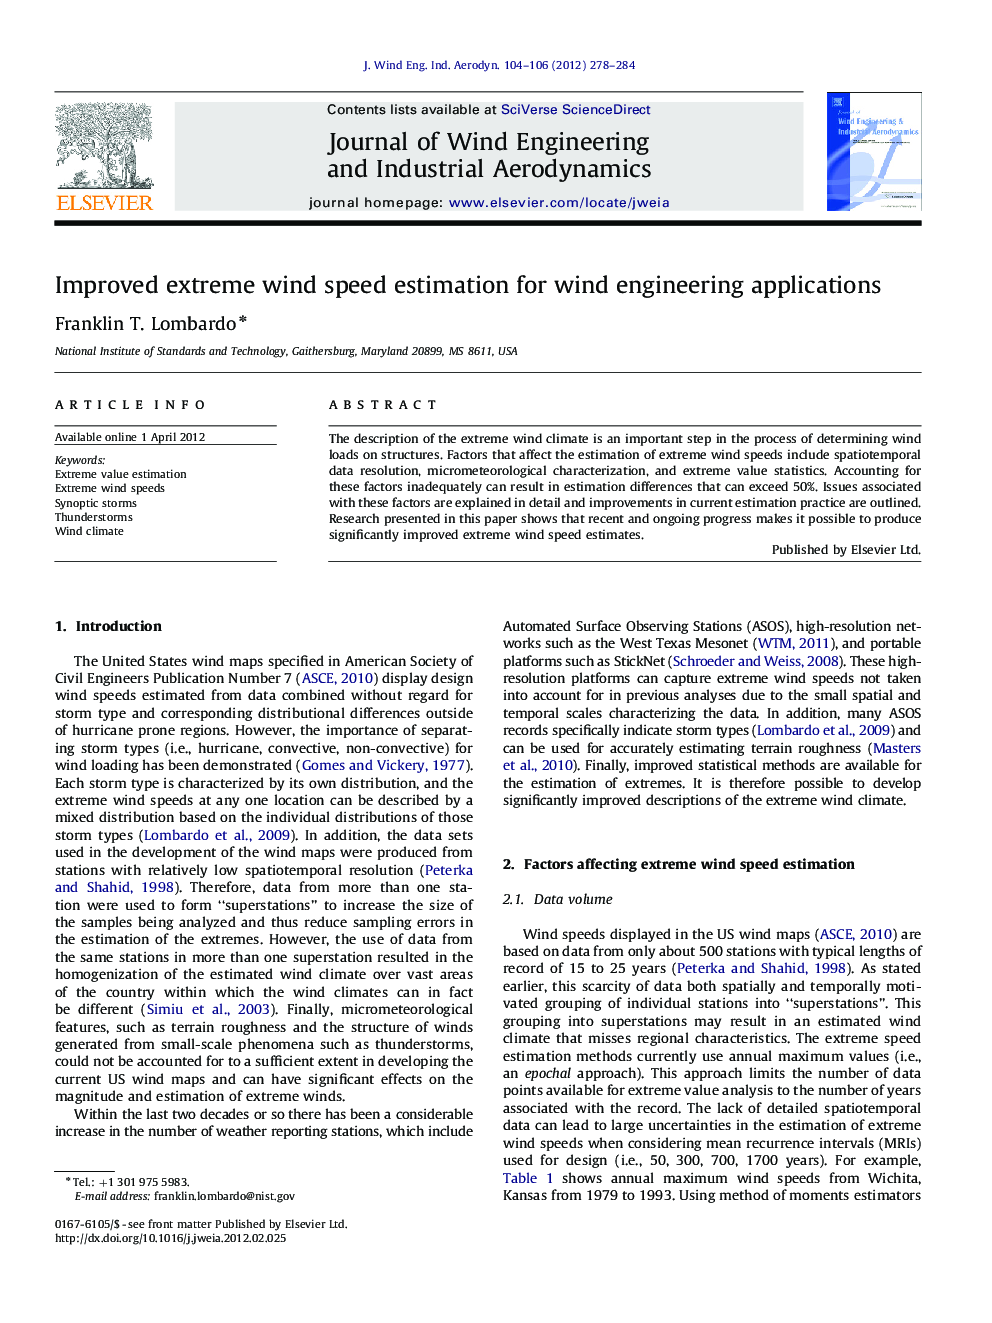 Improved extreme wind speed estimation for wind engineering applications